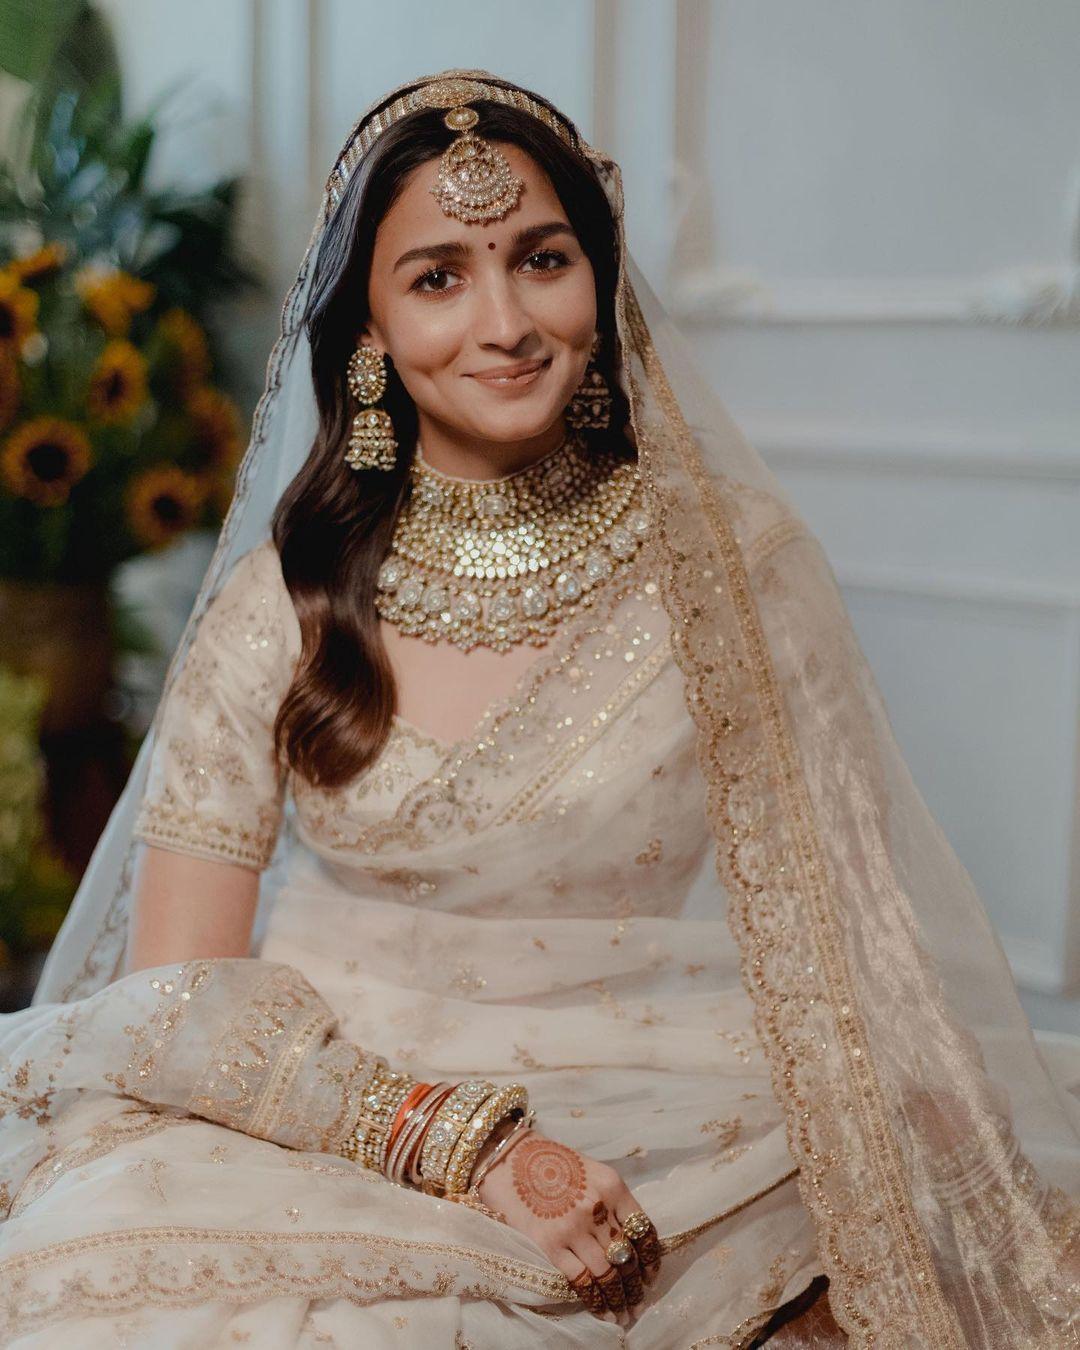 The actress wore a stunning white, heavily embroidered saree by Sabyasachi Mukherjee on her wedding day. She paired the embroidered saree with a matching blouse and a beautiful long veil